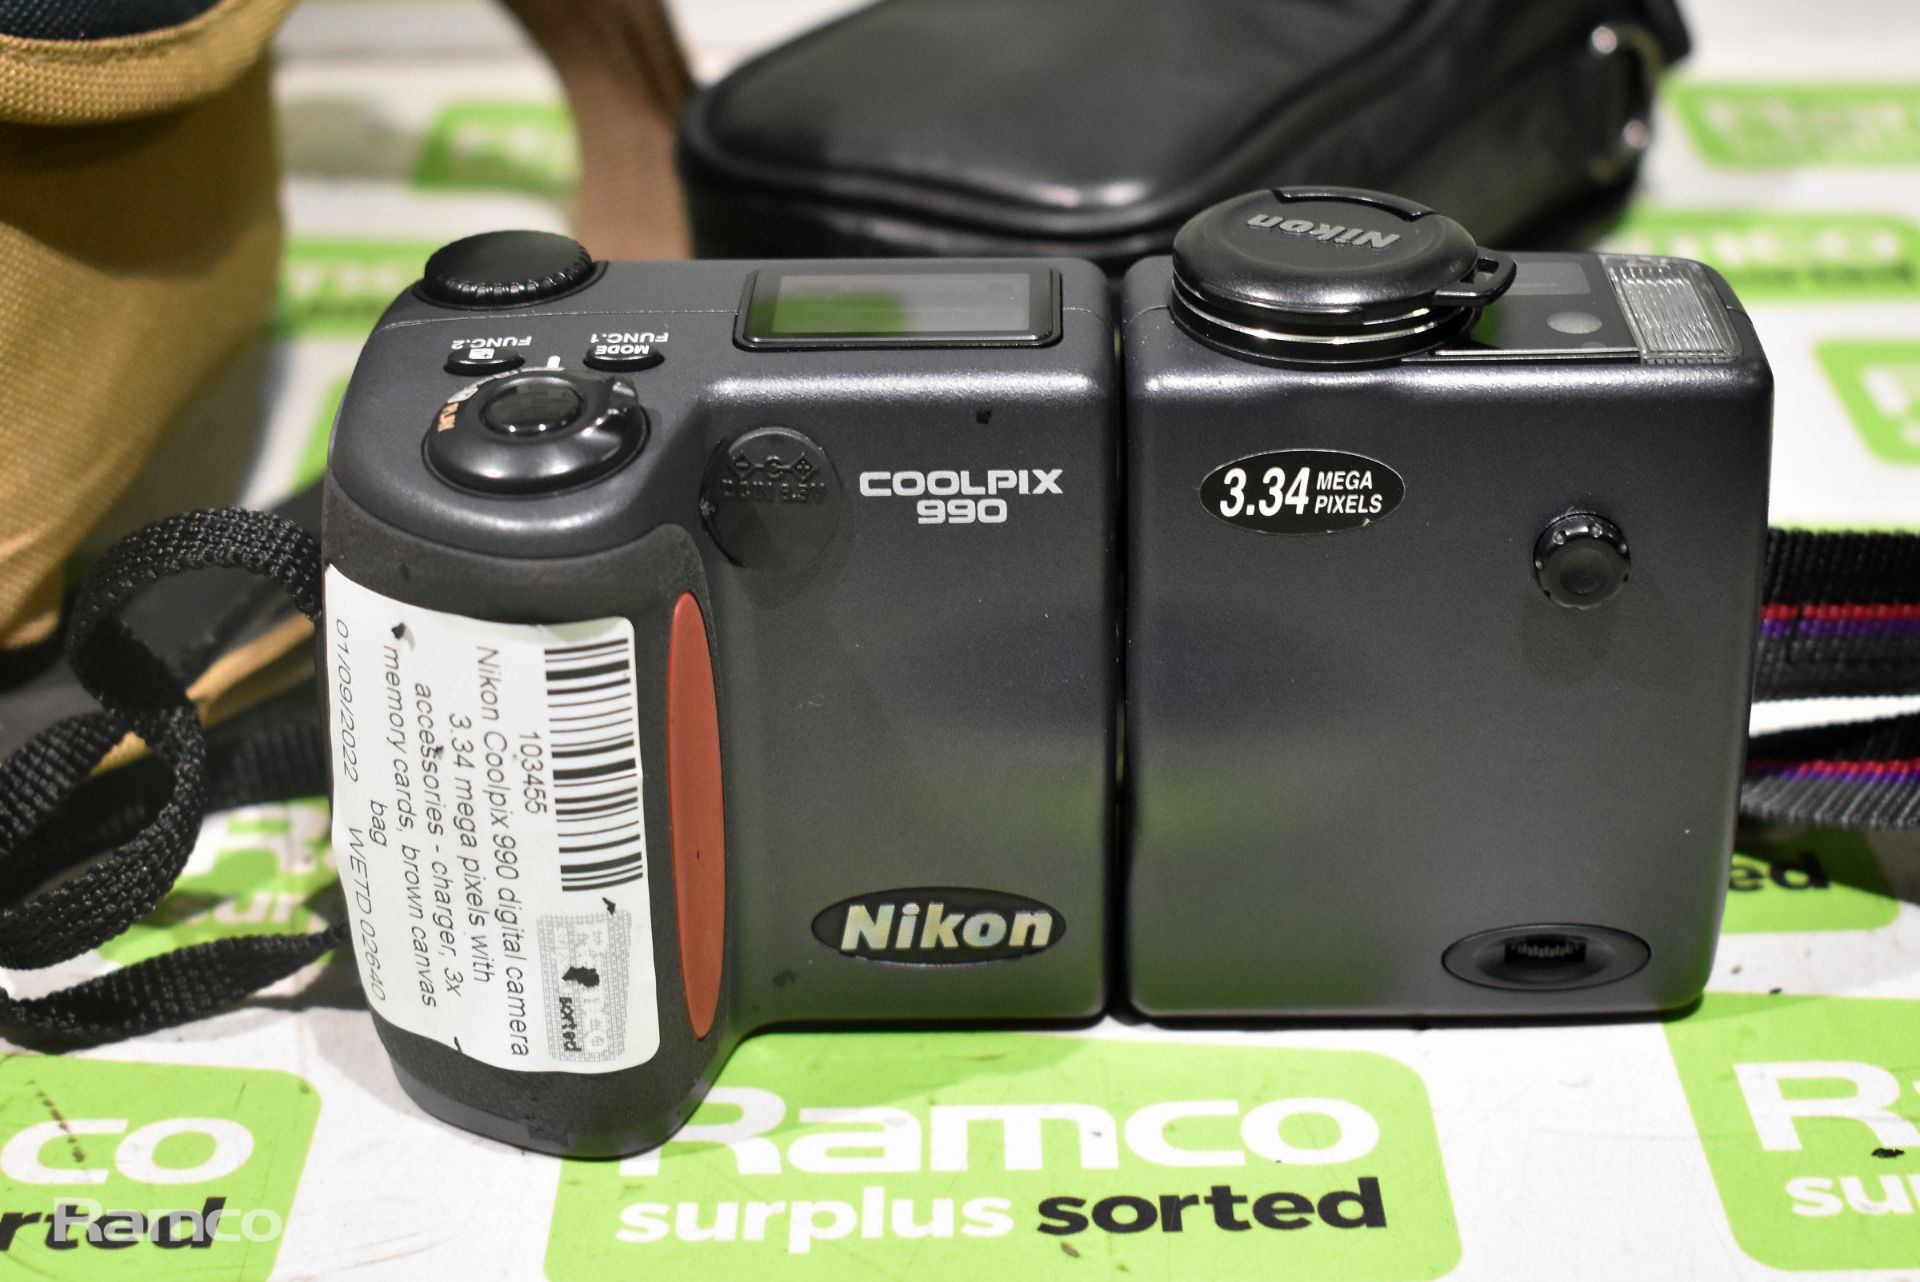 Nikon Coolpix 990 digital camera 3.34 mega pixels with accessories - charger, 3x memory cards - Image 2 of 6